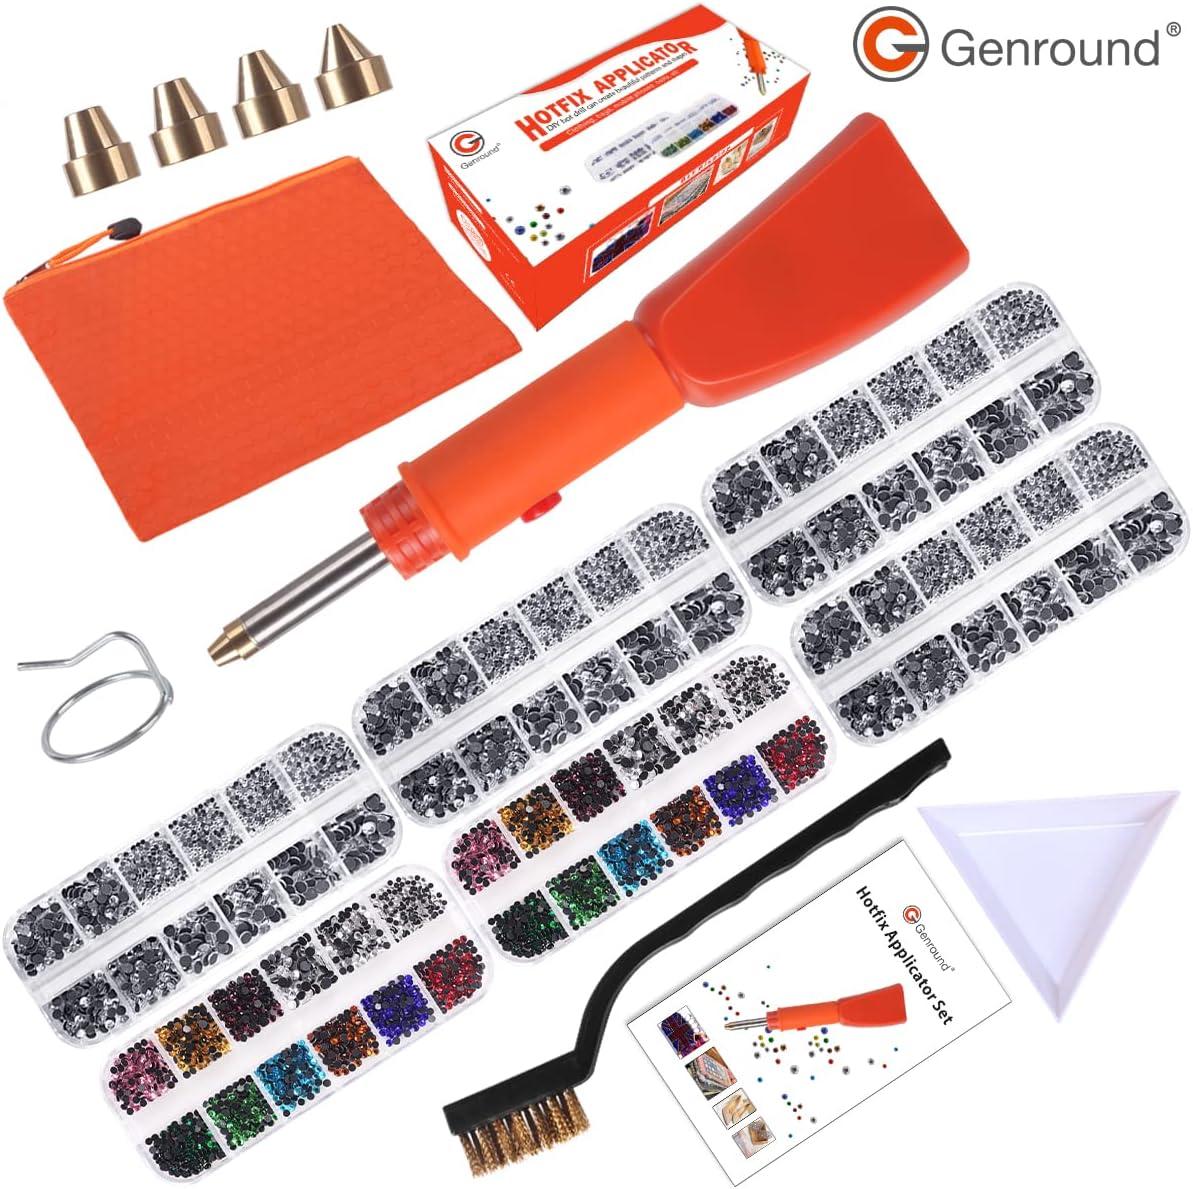 Genround Hotfix Rhinestones Applicator, (Rinestones Can be Sucked in)  (Genround Design) Hotfix Applicator with 6pcs Rhinestones Set Hot Fixed  Crystal Bling Machine Heat Pen for Clothing Shoes Bags